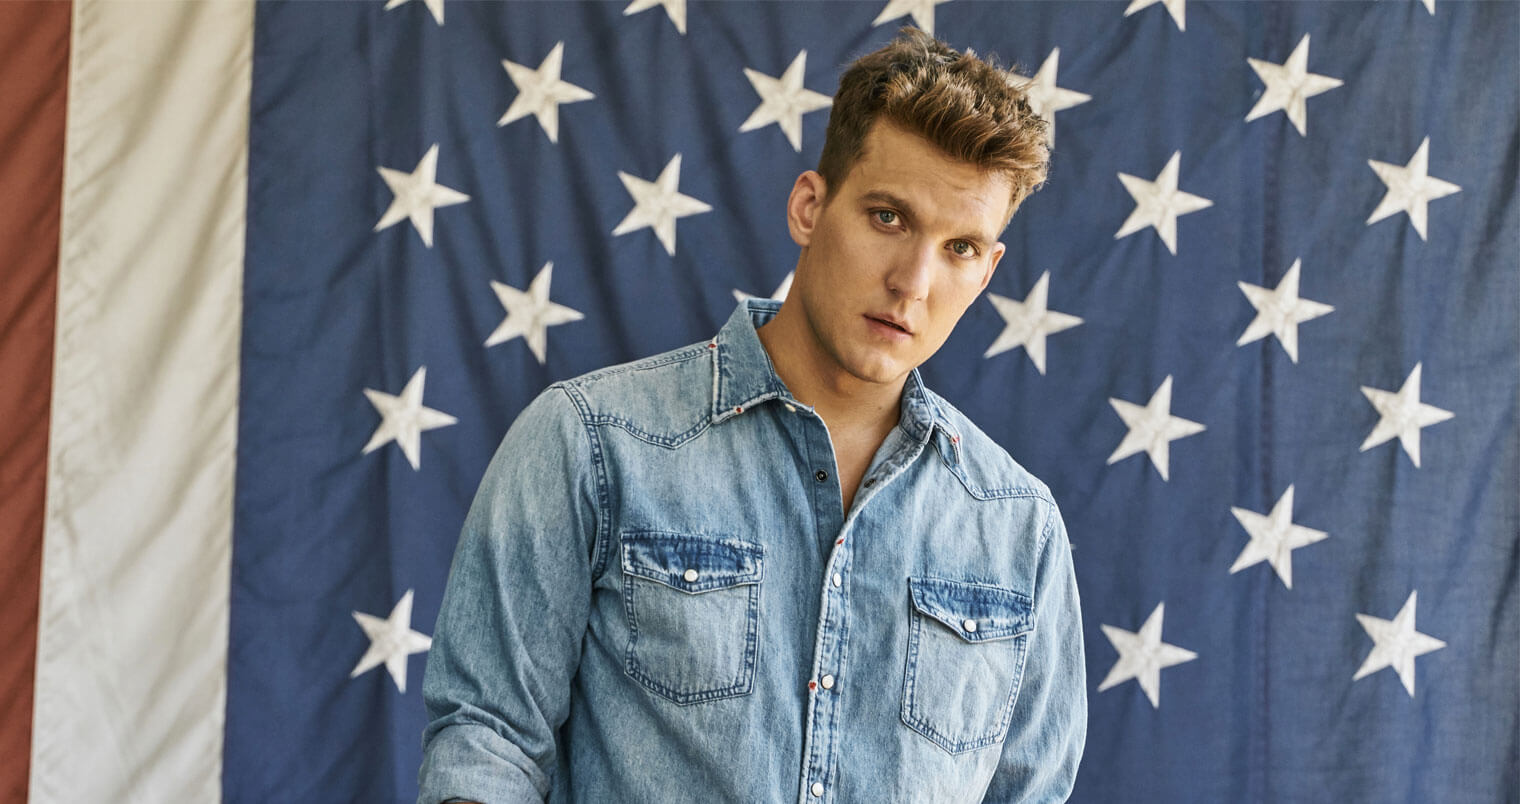 Chillin' with Scott Michael Foster, featured image, stars and stripes backdrop